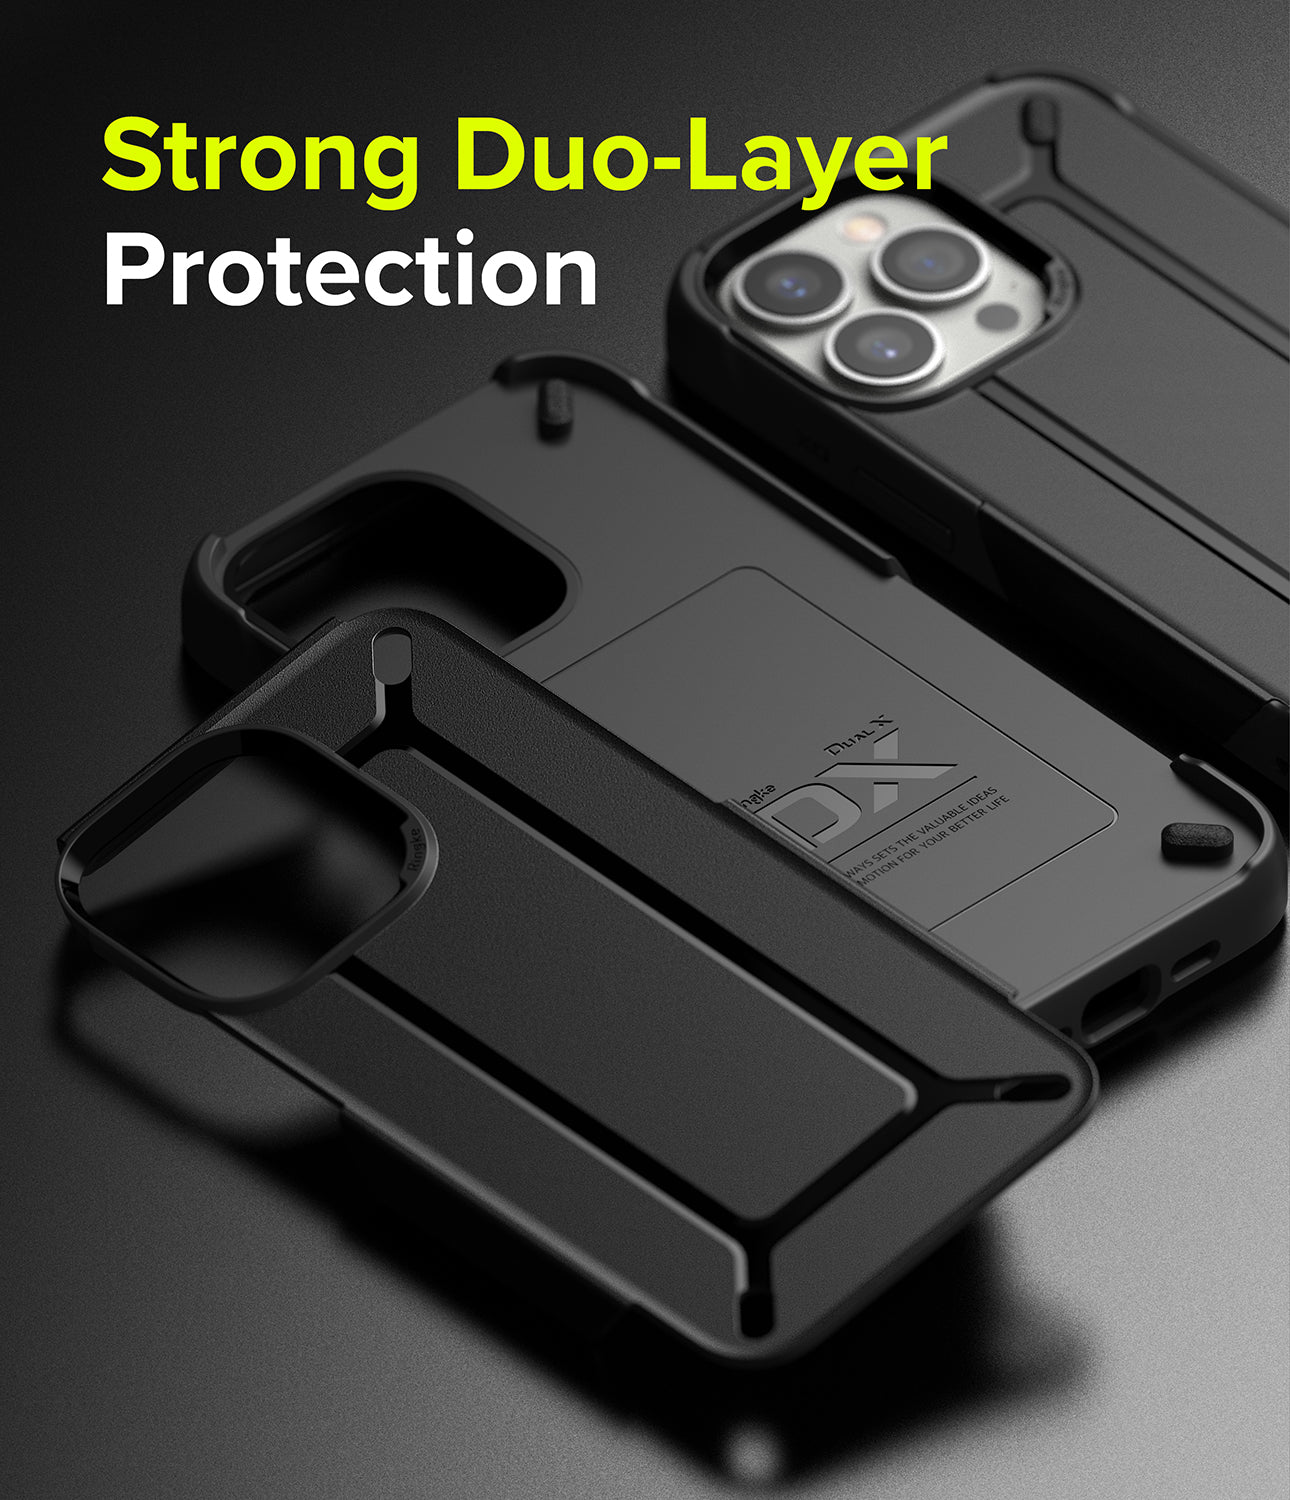 Strong duo-layer protection